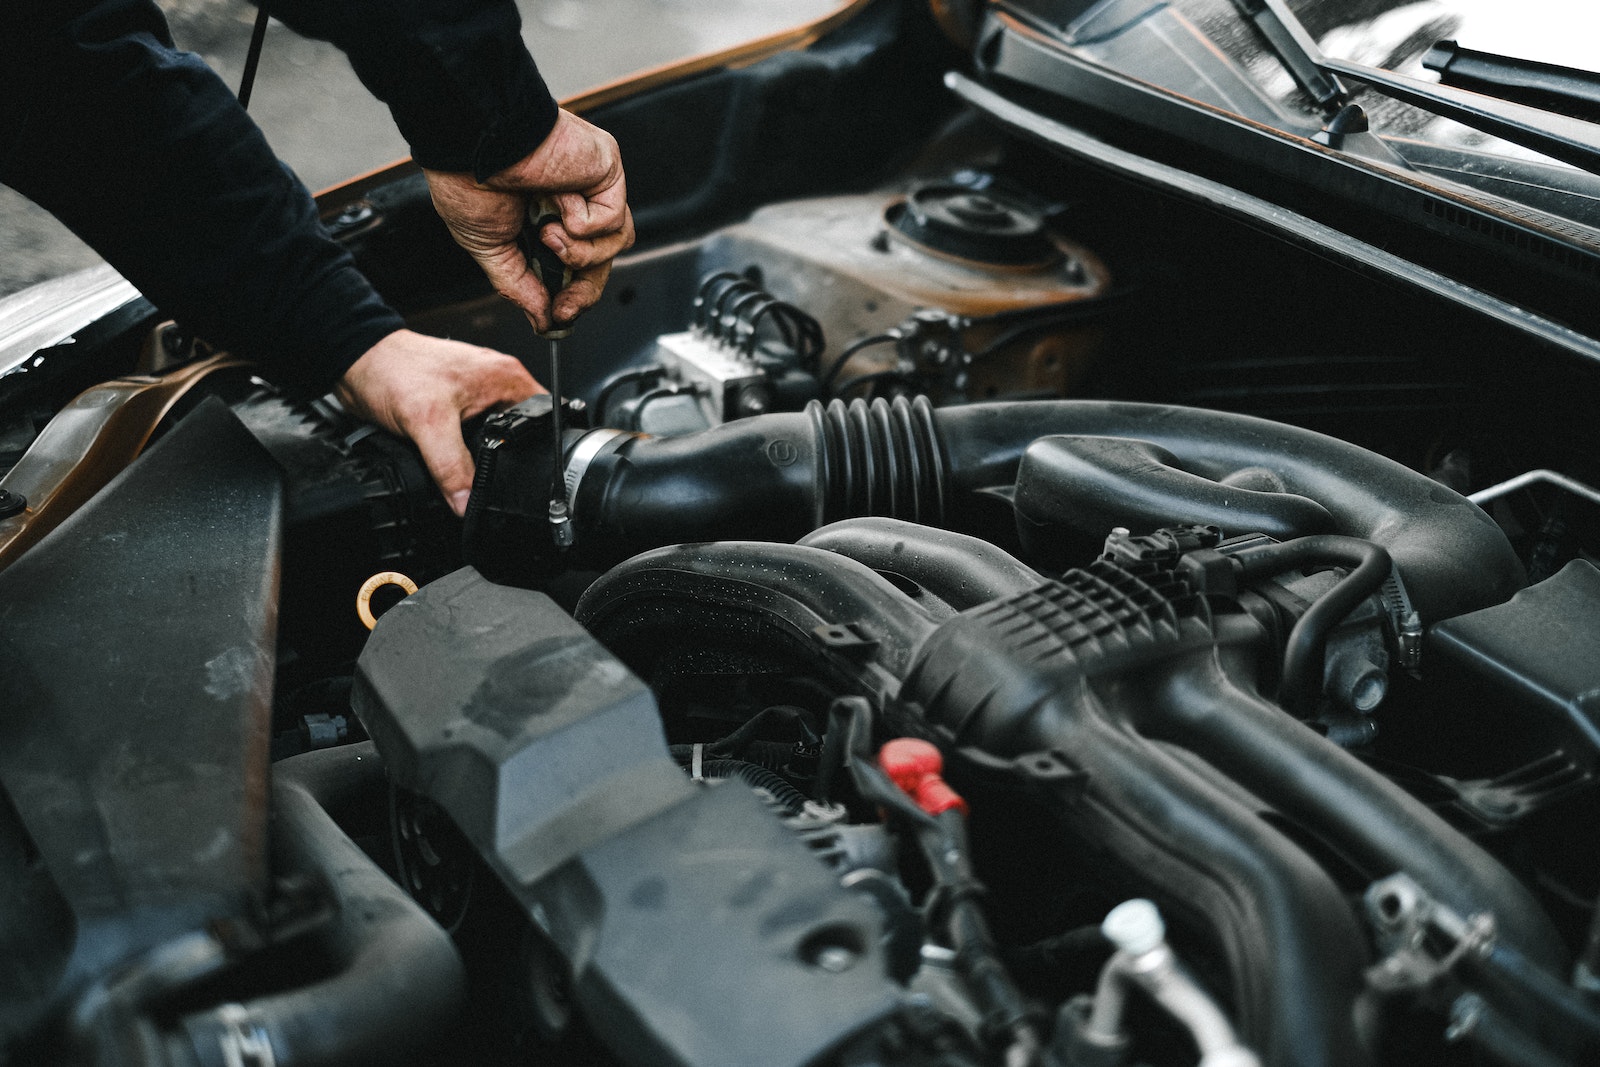 What Are The Common Causes Of Car Overheating And How Can I Prevent It?